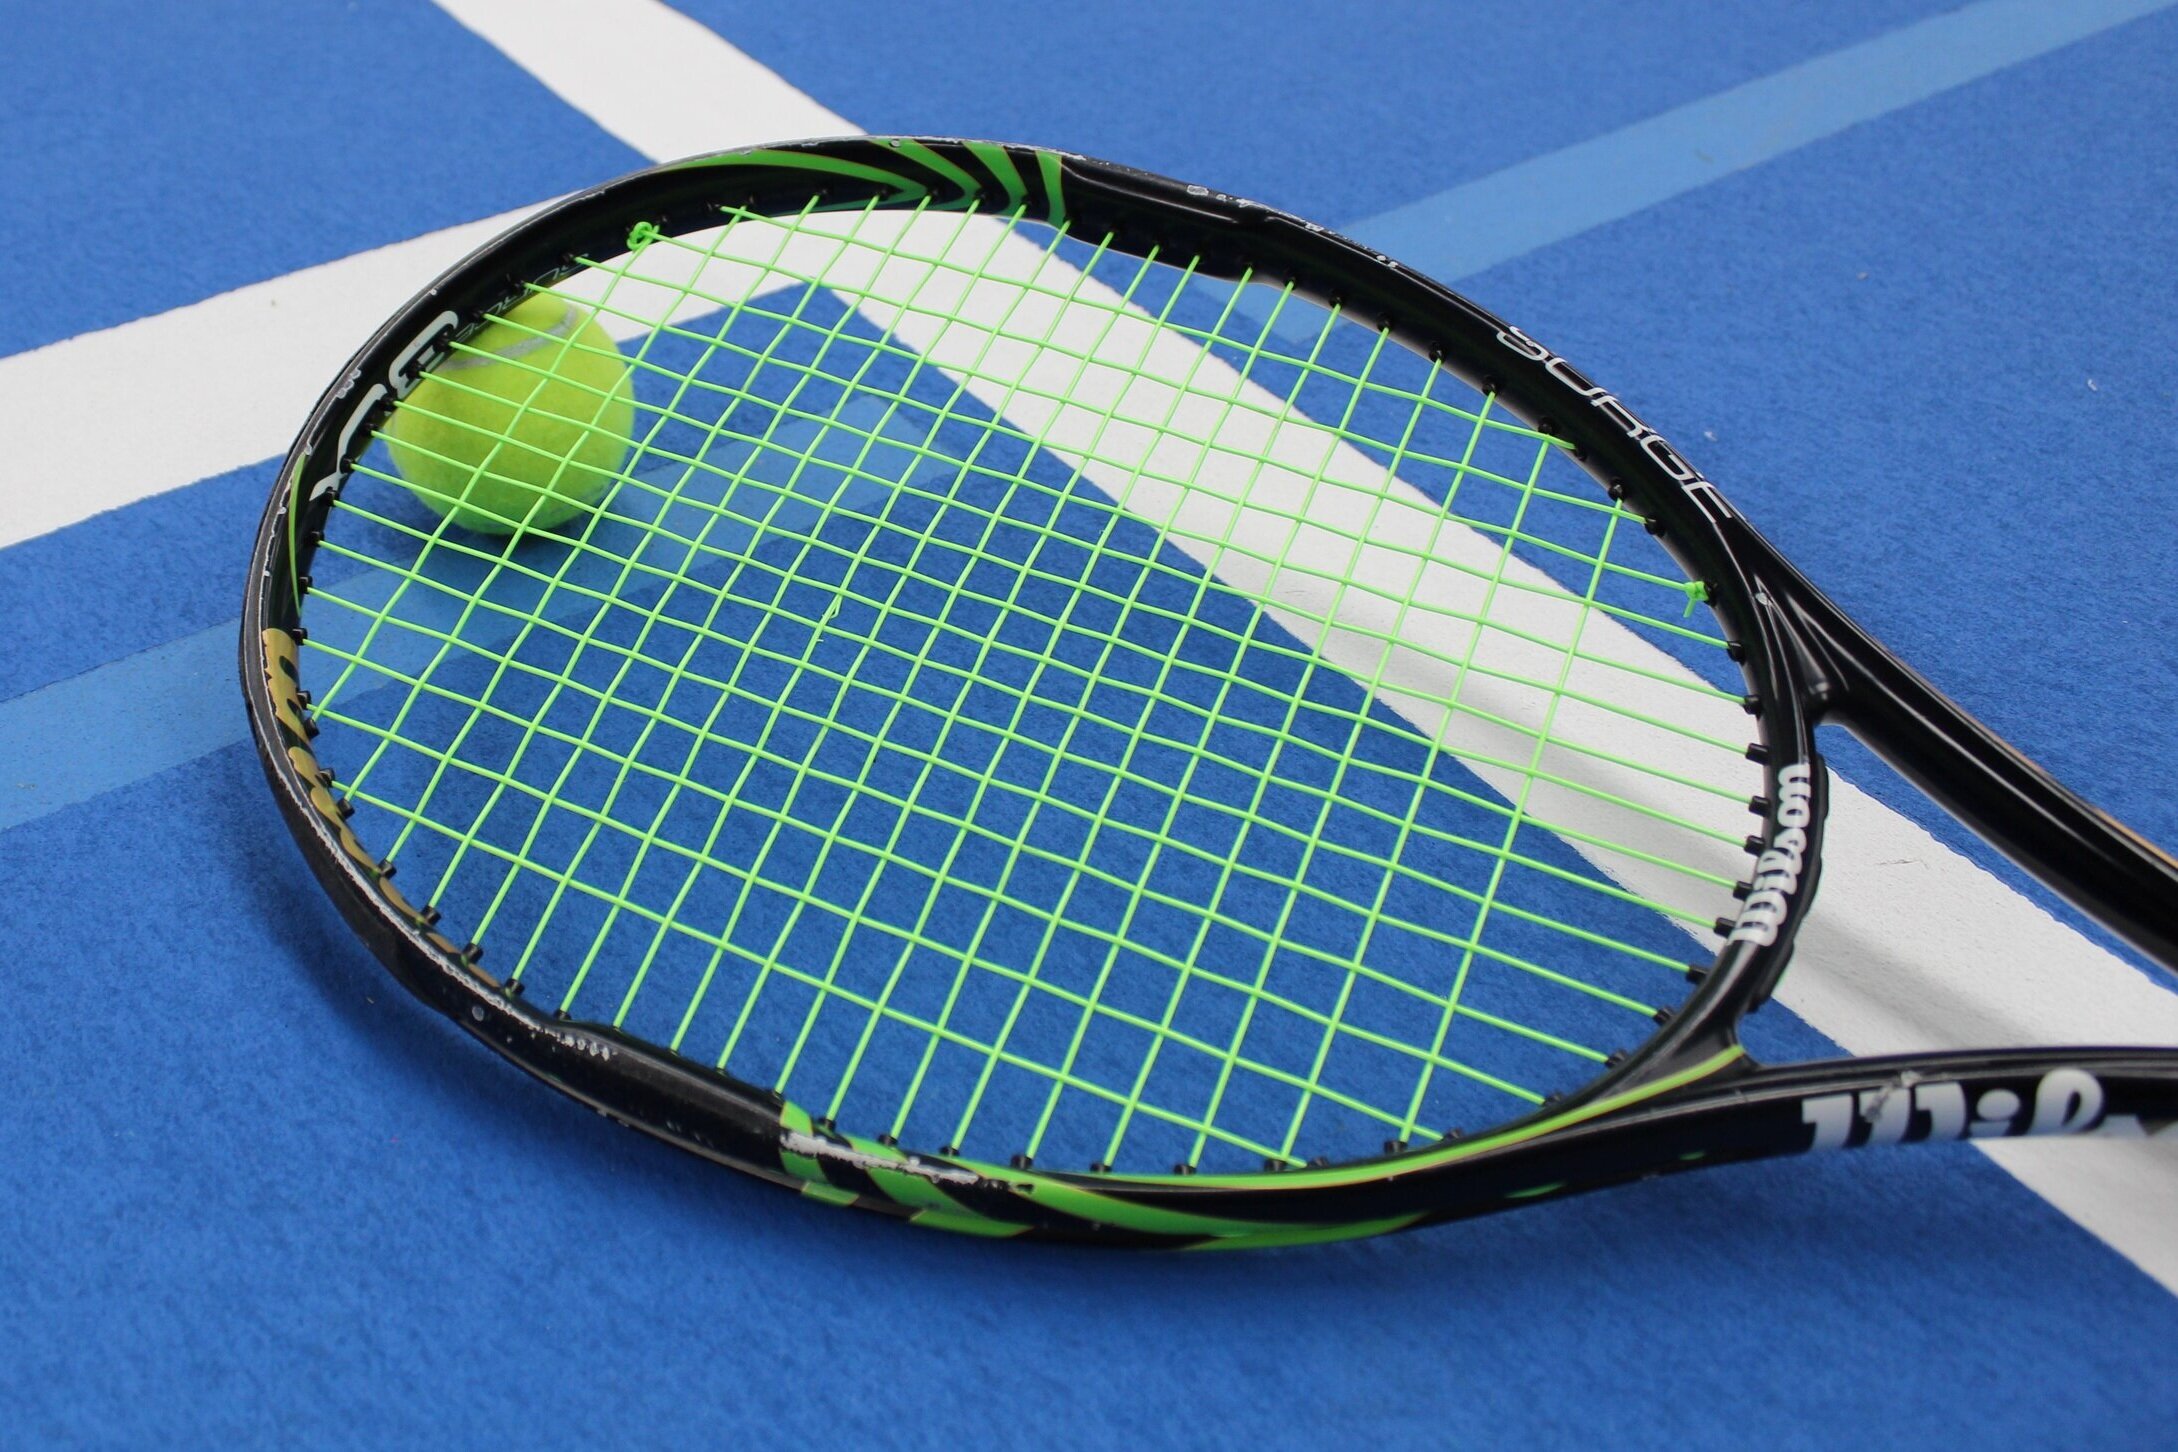 Details about   Street Tennis Club Tennis Rackets for Kids Proper Equipment Helps You Learn... 